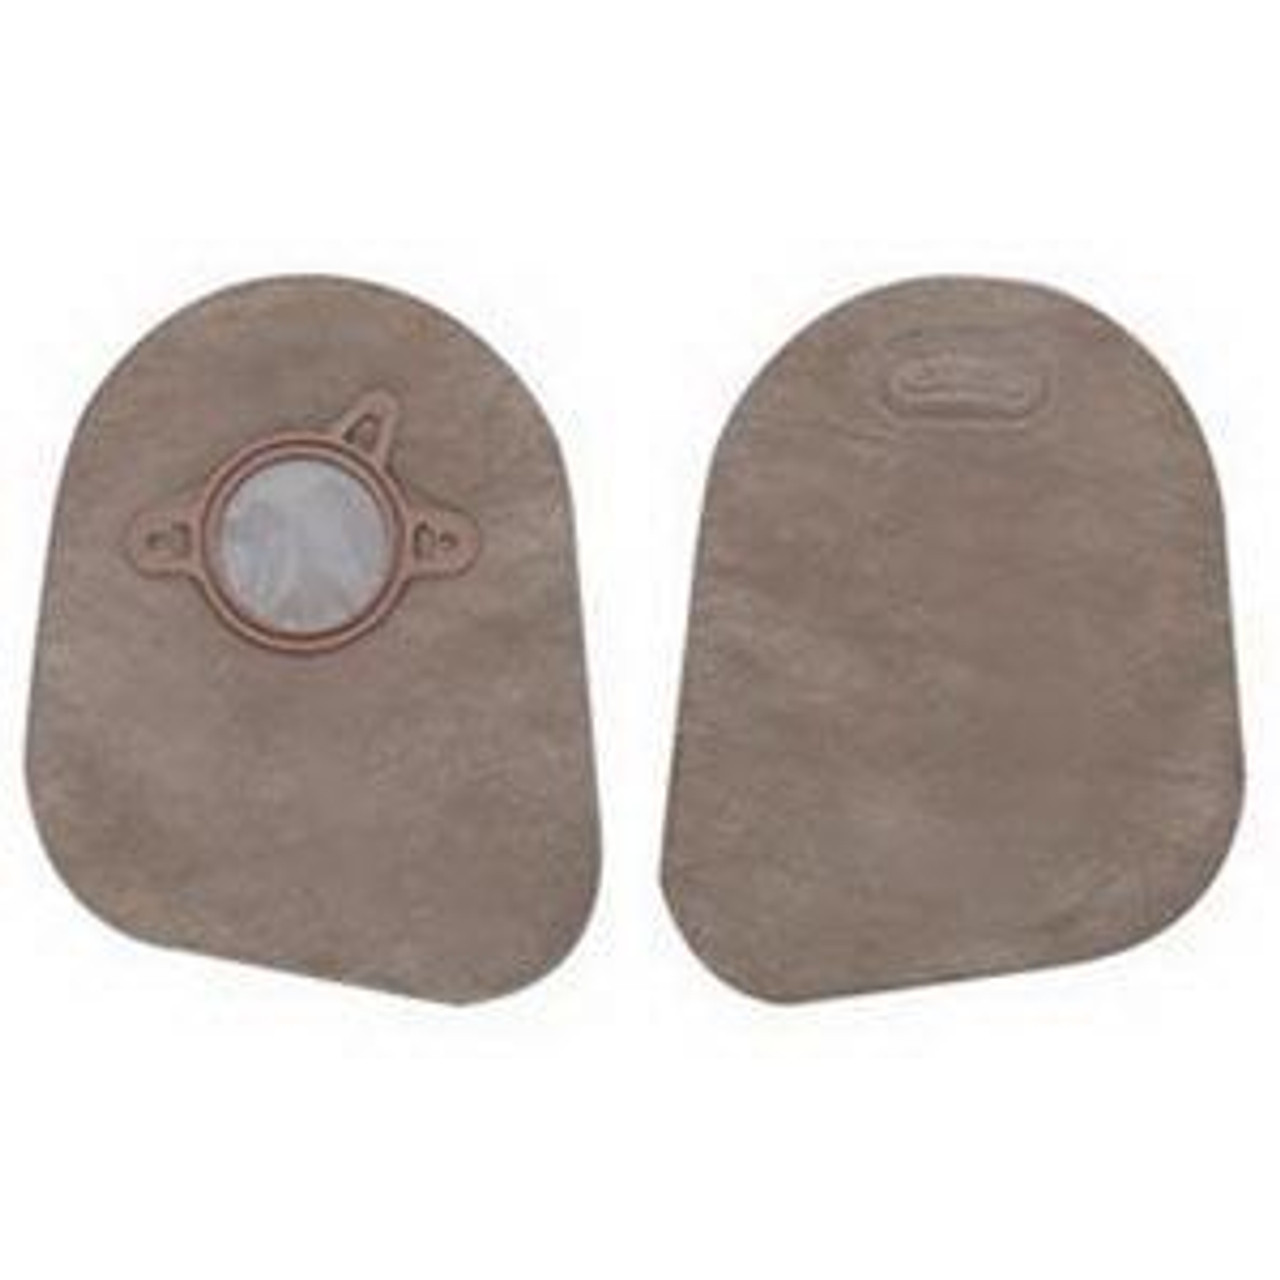 NEW IMAGE CLOSED MINI Pouch, FILTER, 2 1/4" FLANGE, BEIGE BX/60 (HOL-18393) (Hollister 18393)